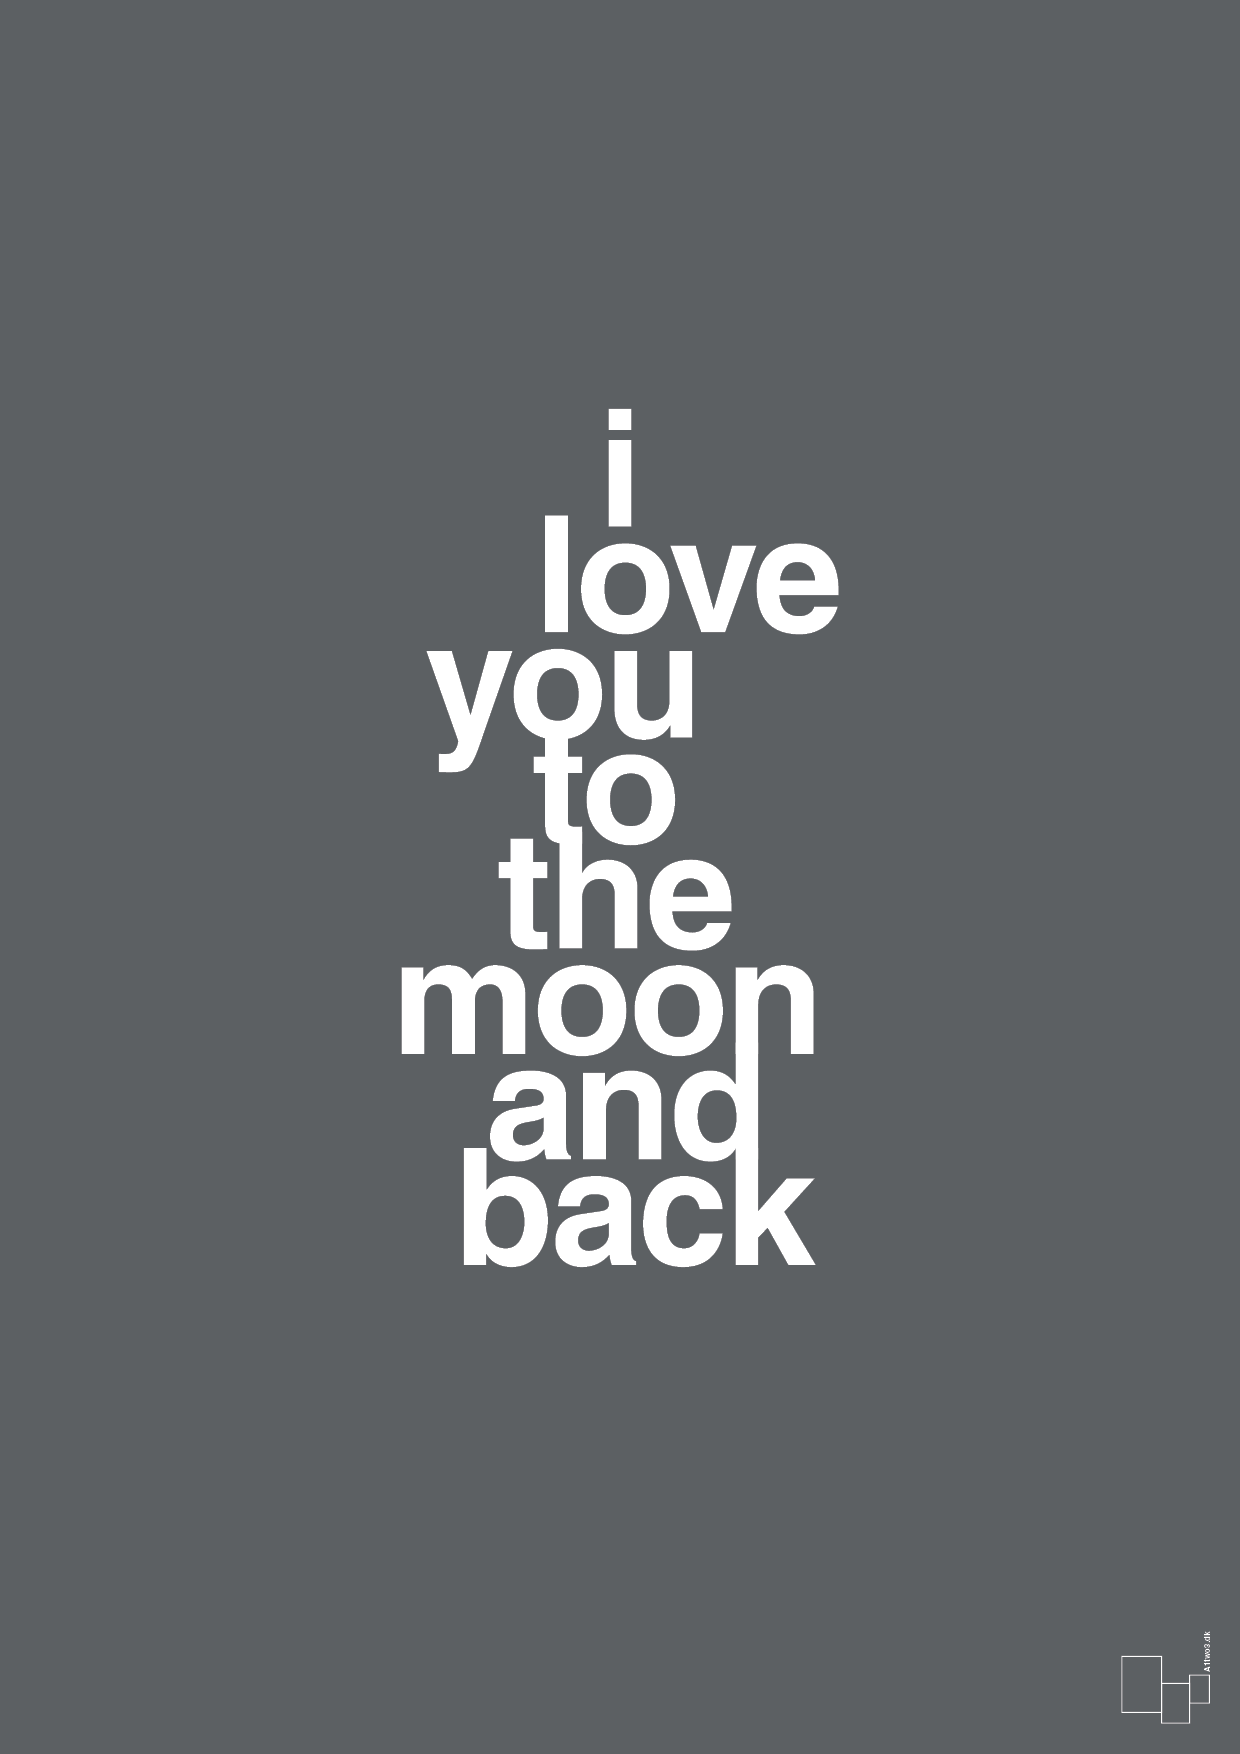 i love you to the moon and back - Plakat med Ordsprog i Graphic Charcoal